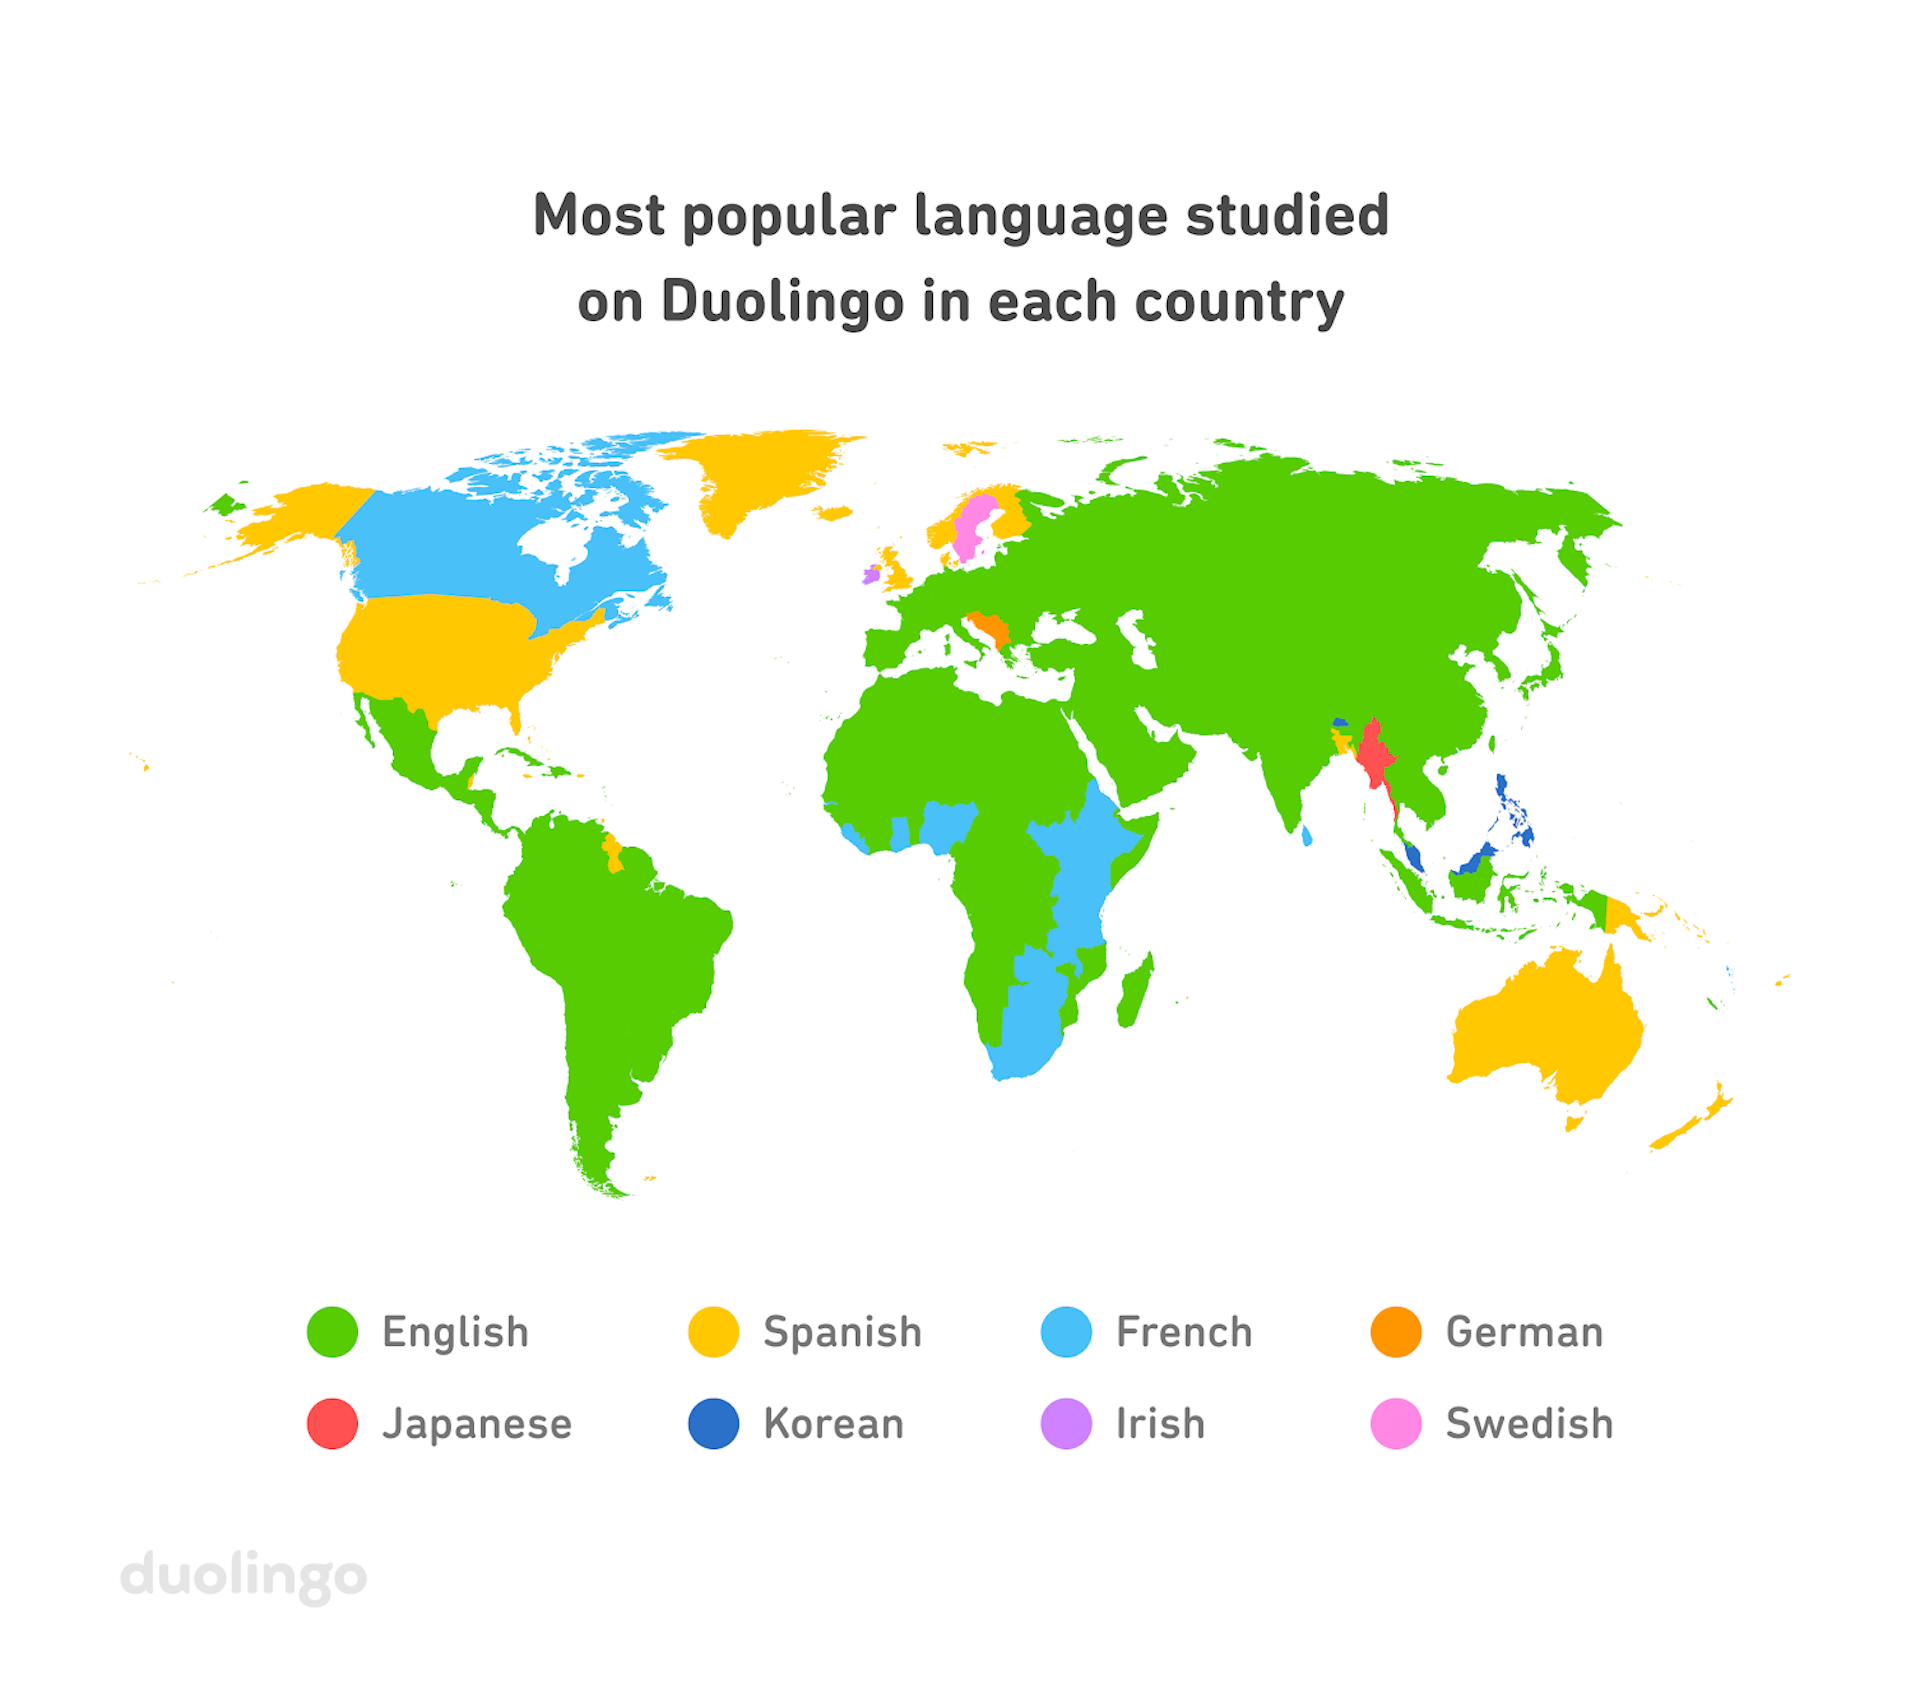 Duolingo map charting the most popular languages studied around the world